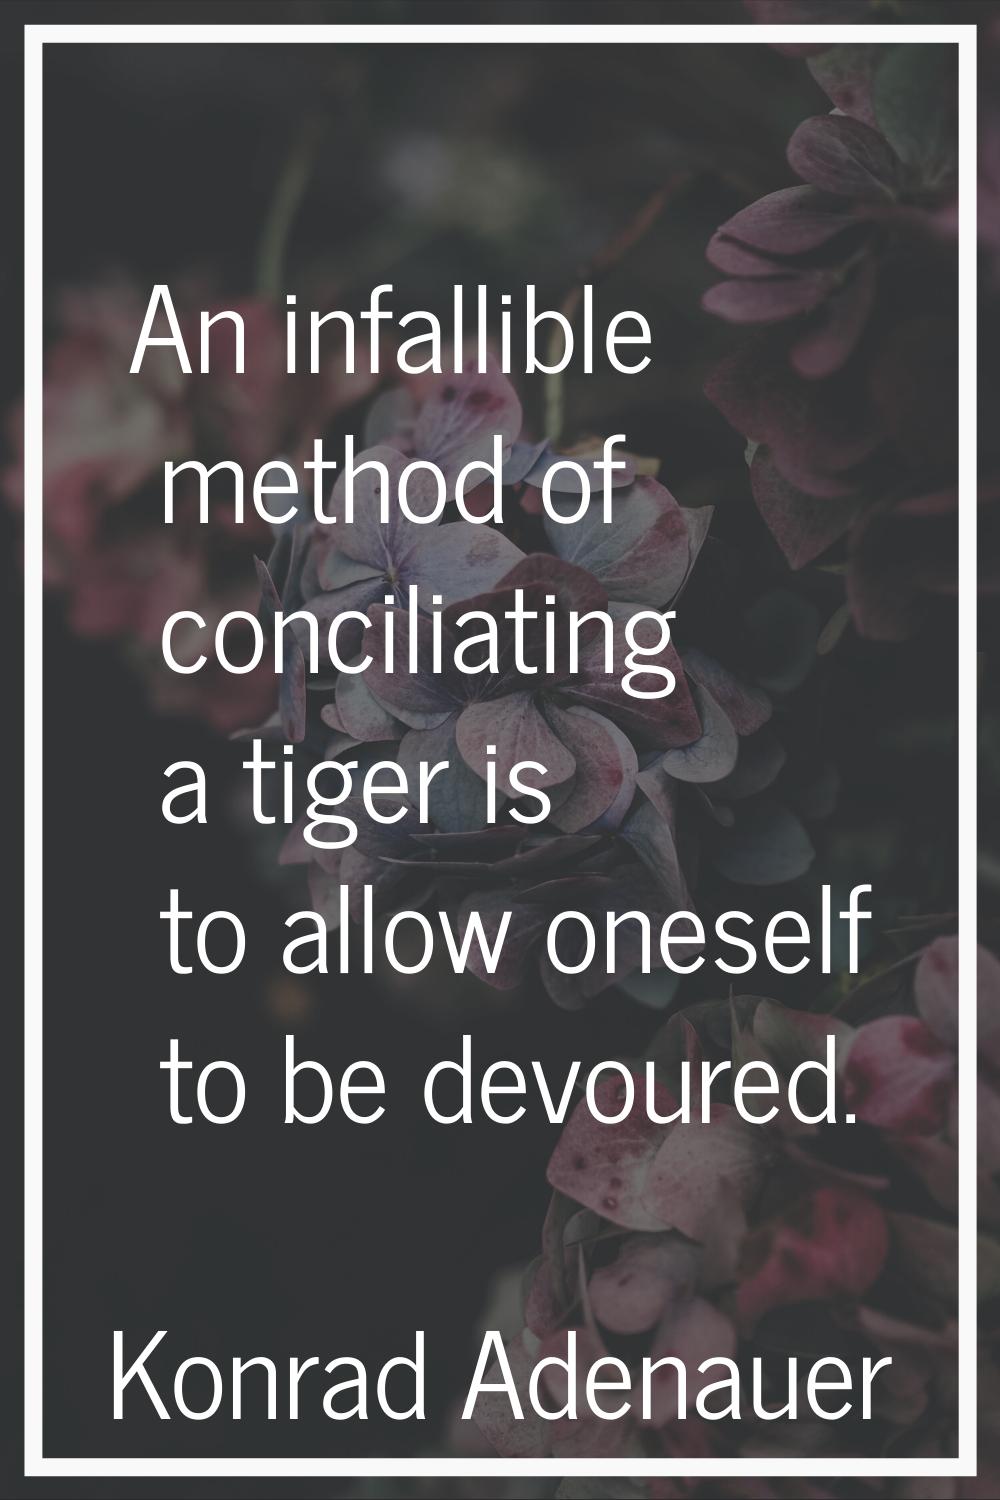 An infallible method of conciliating a tiger is to allow oneself to be devoured.